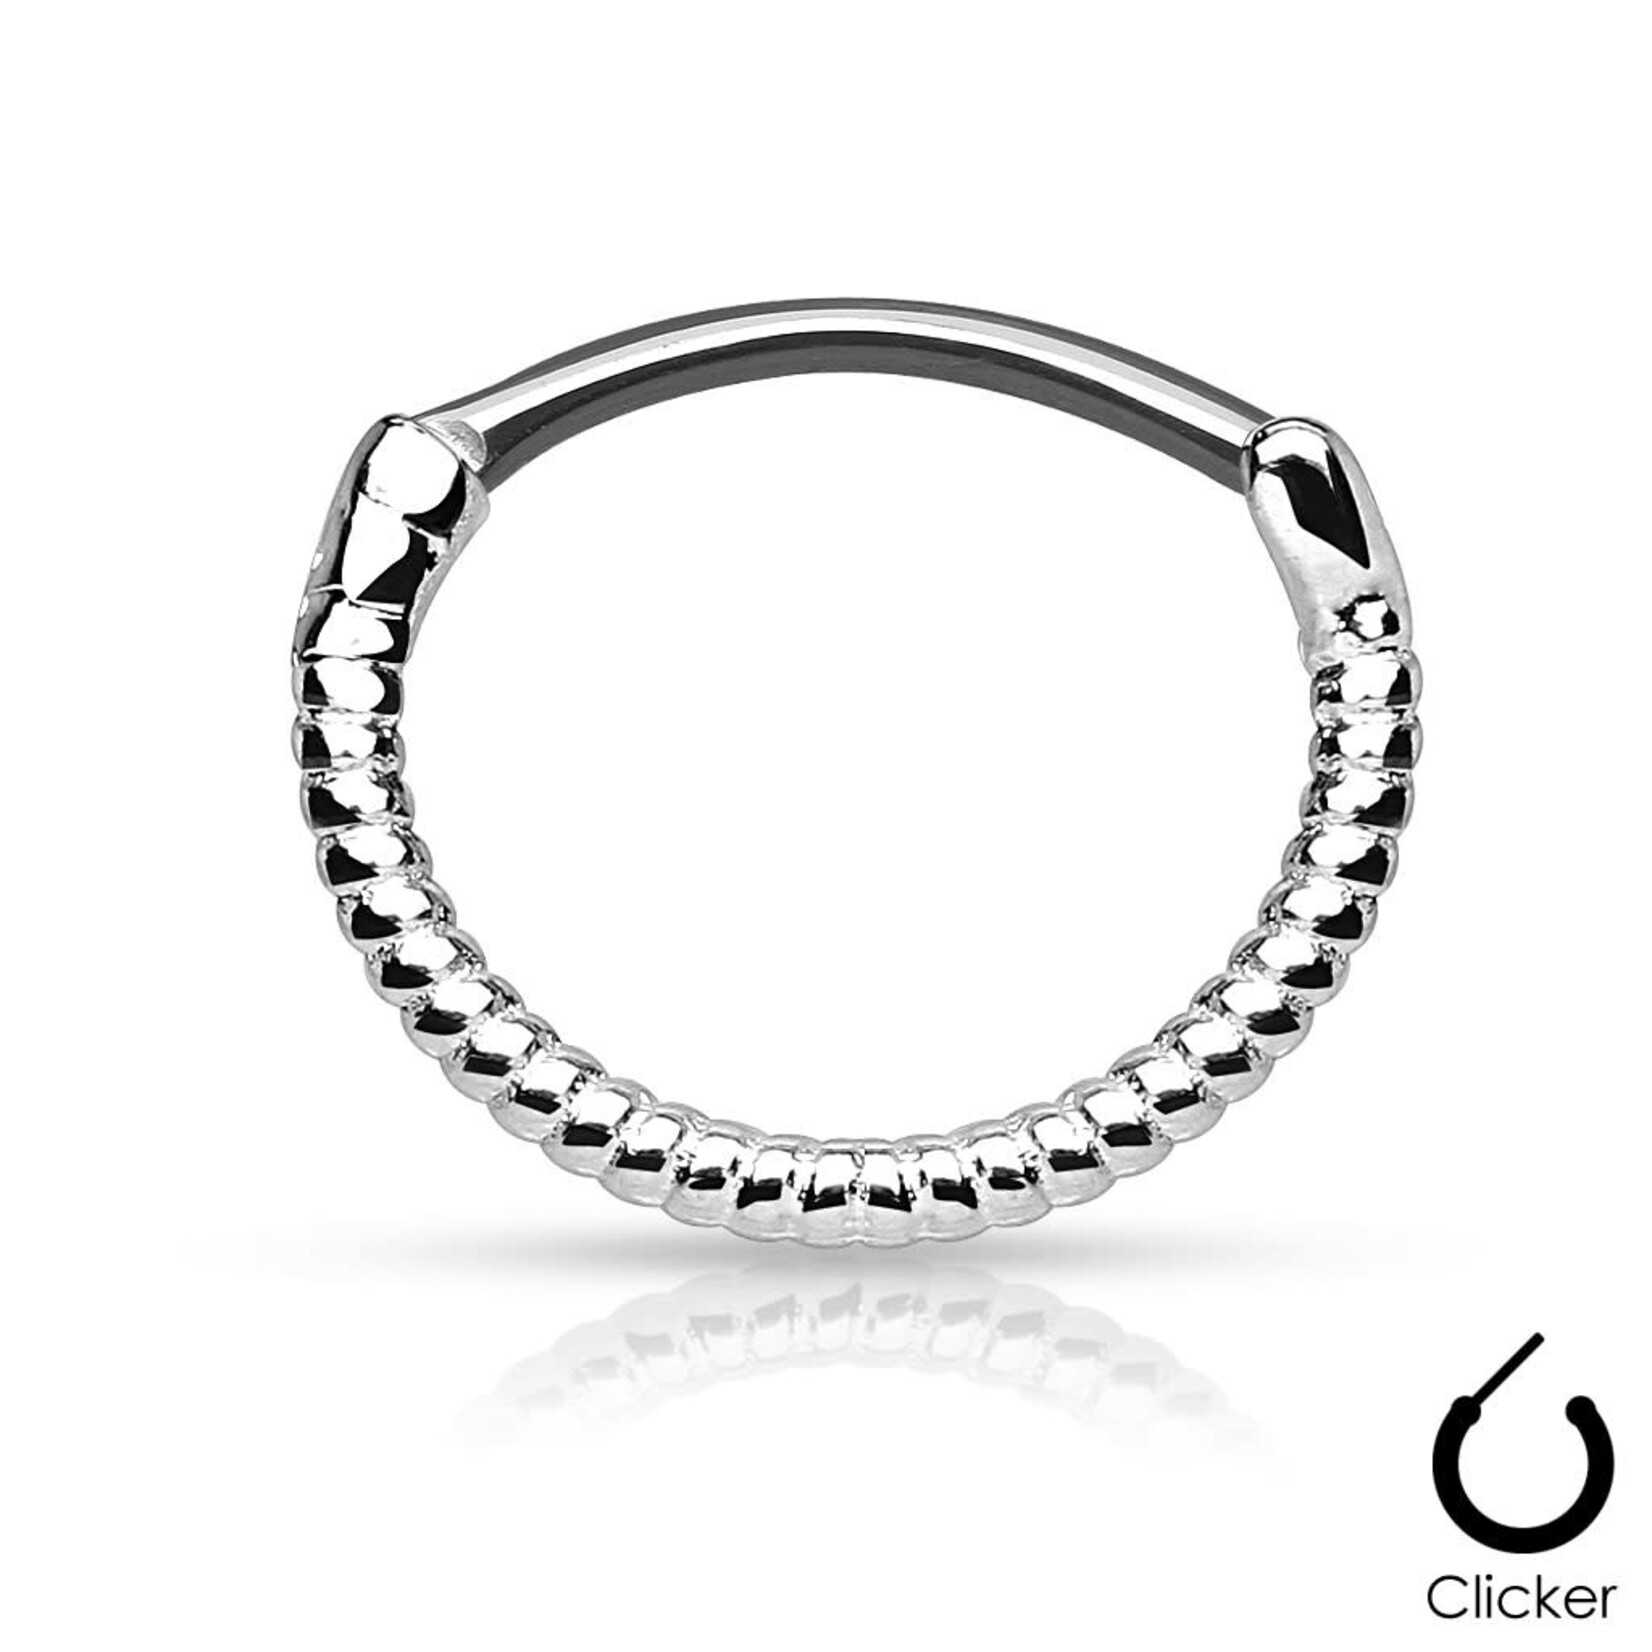 Hollywood Body Jewelry Twisted Rope Septum Clicker